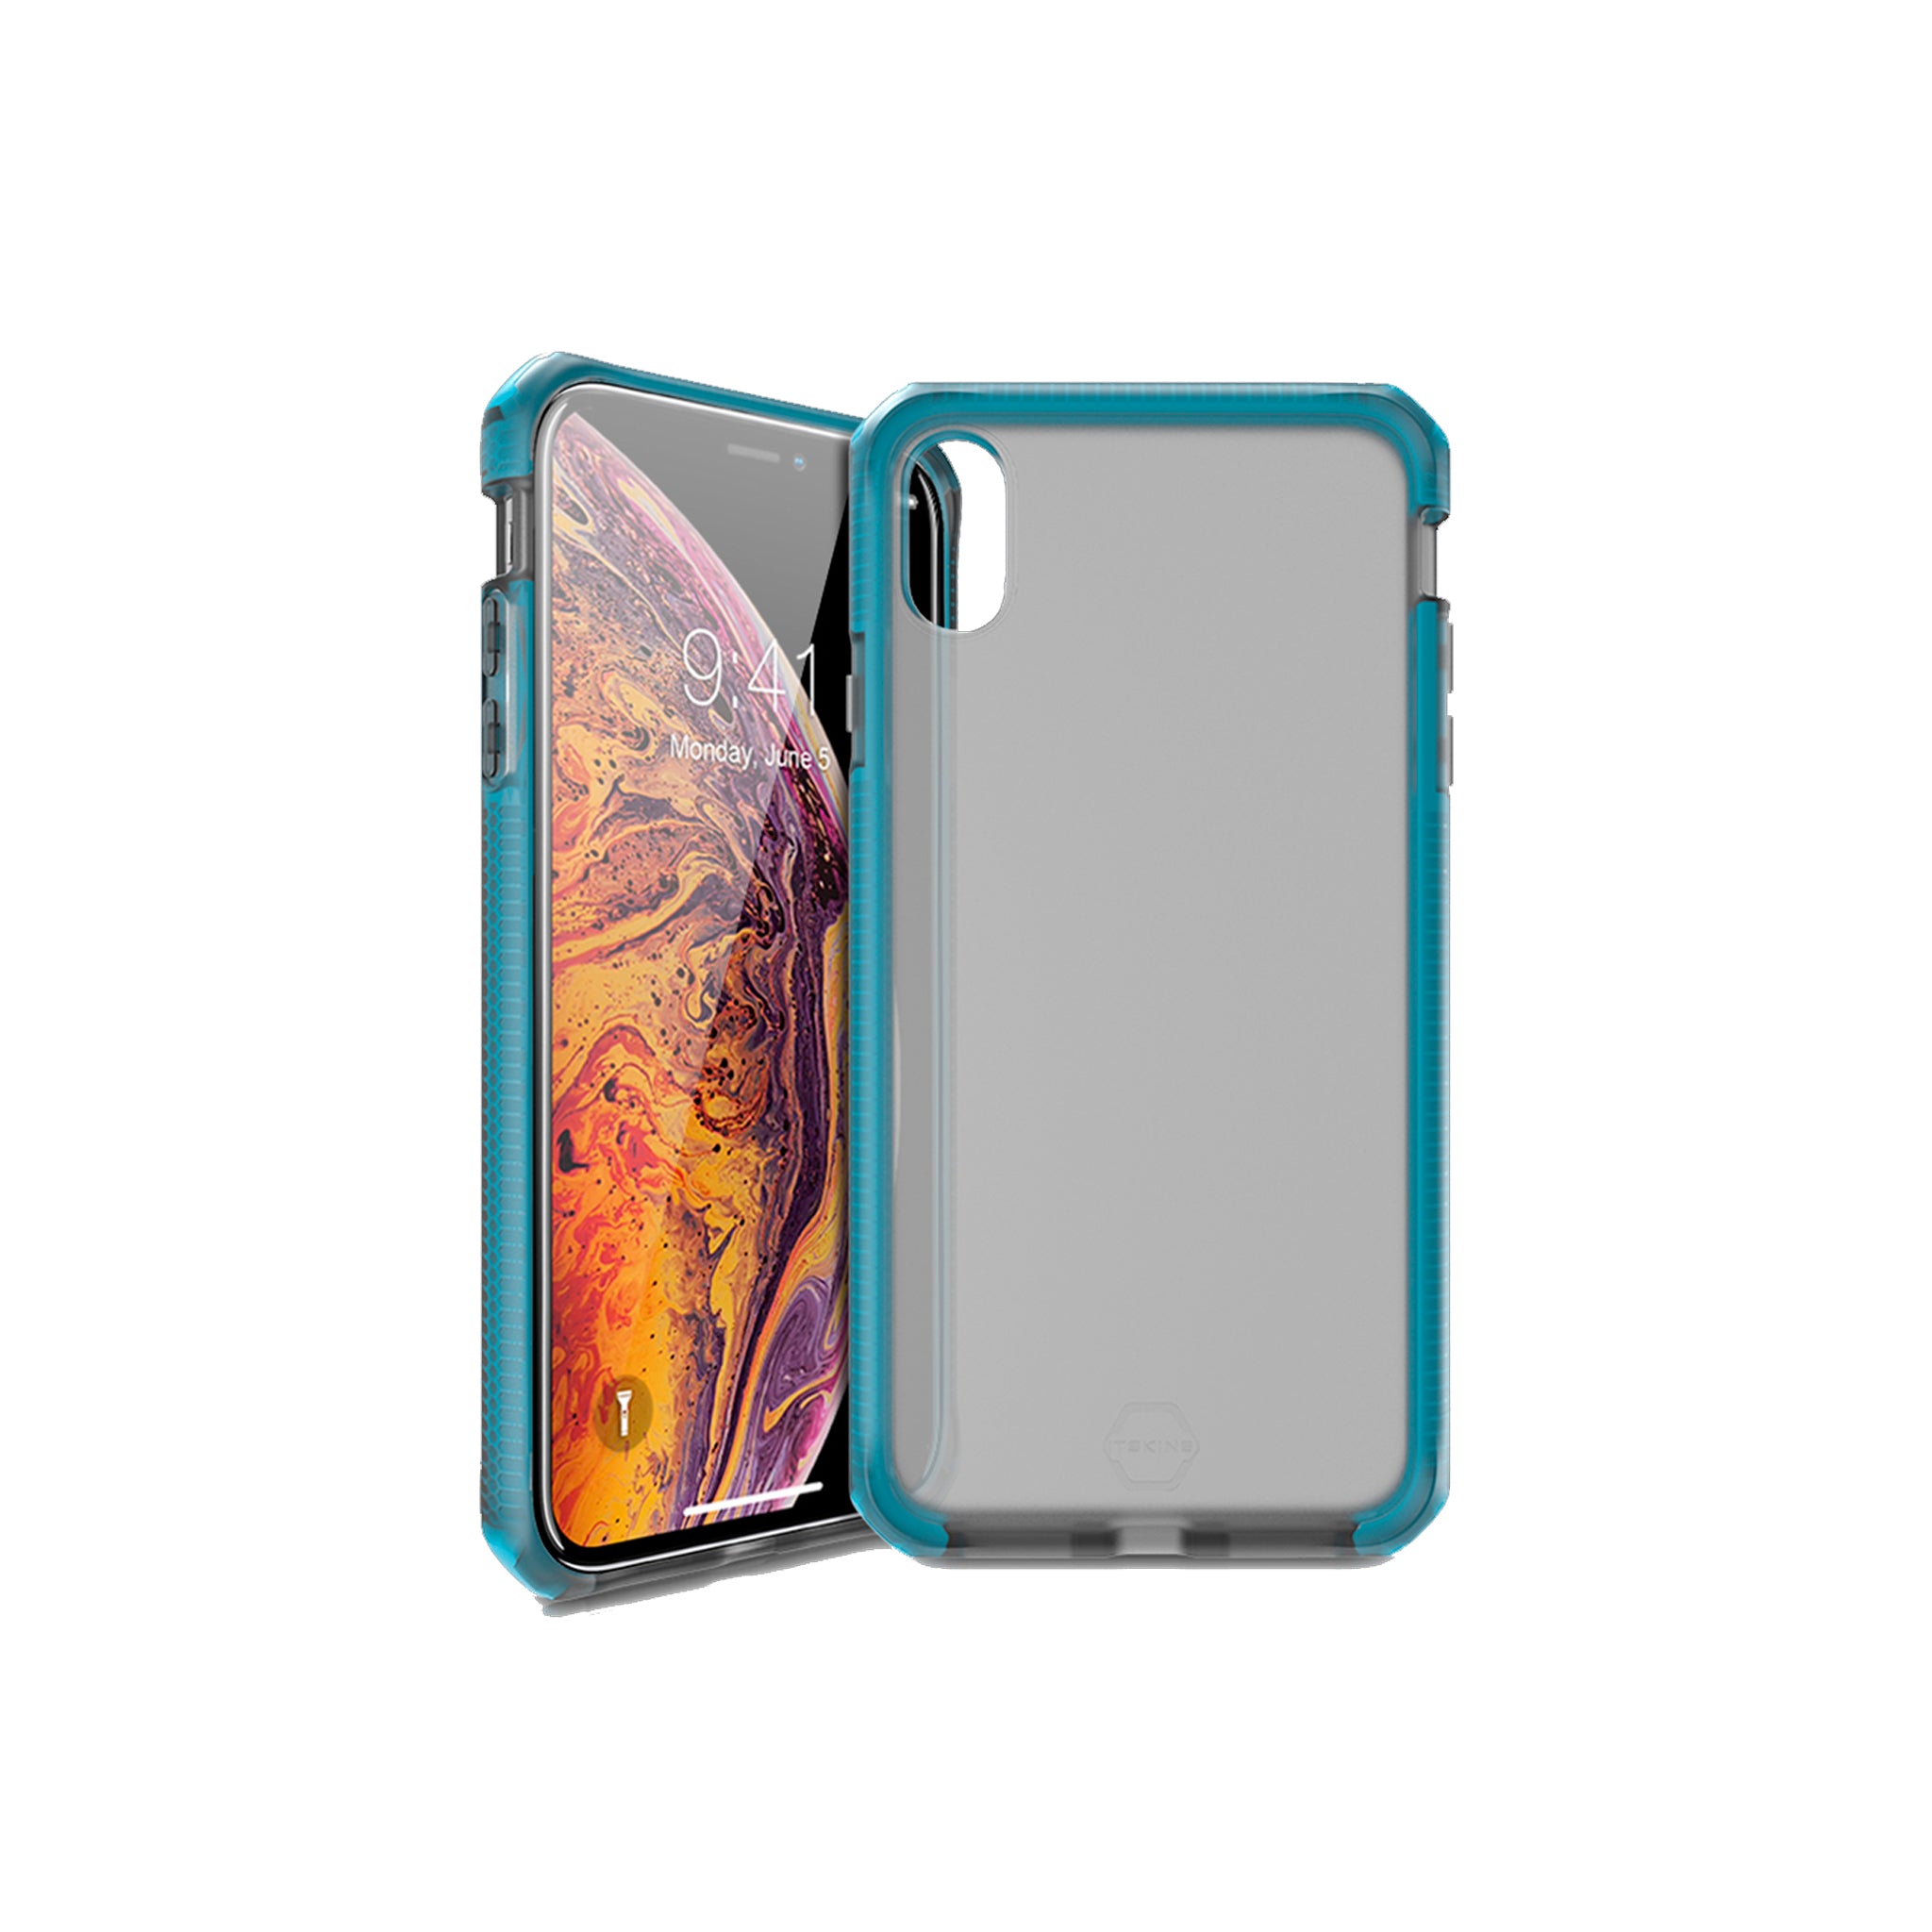 Itskins - Supreme Frost Case For Apple iPhone  Xs Max - Centurion Blue And Black